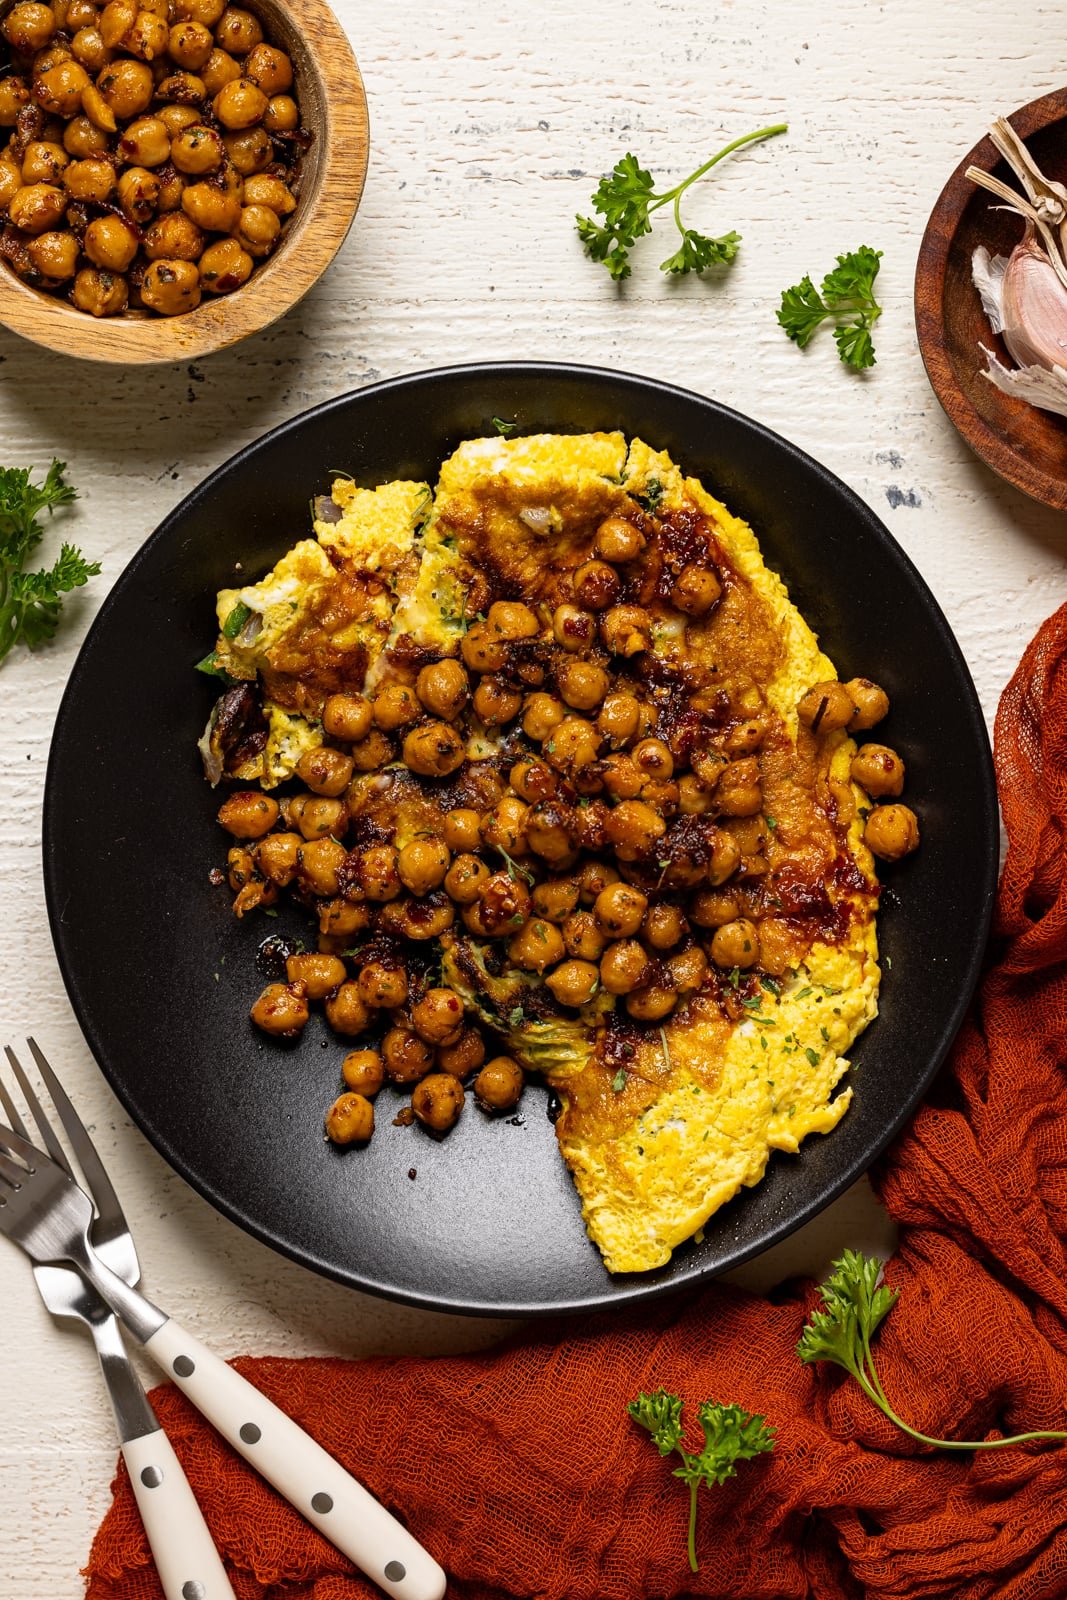 Omelette in a black plate with two forks and a side of chickpeas.